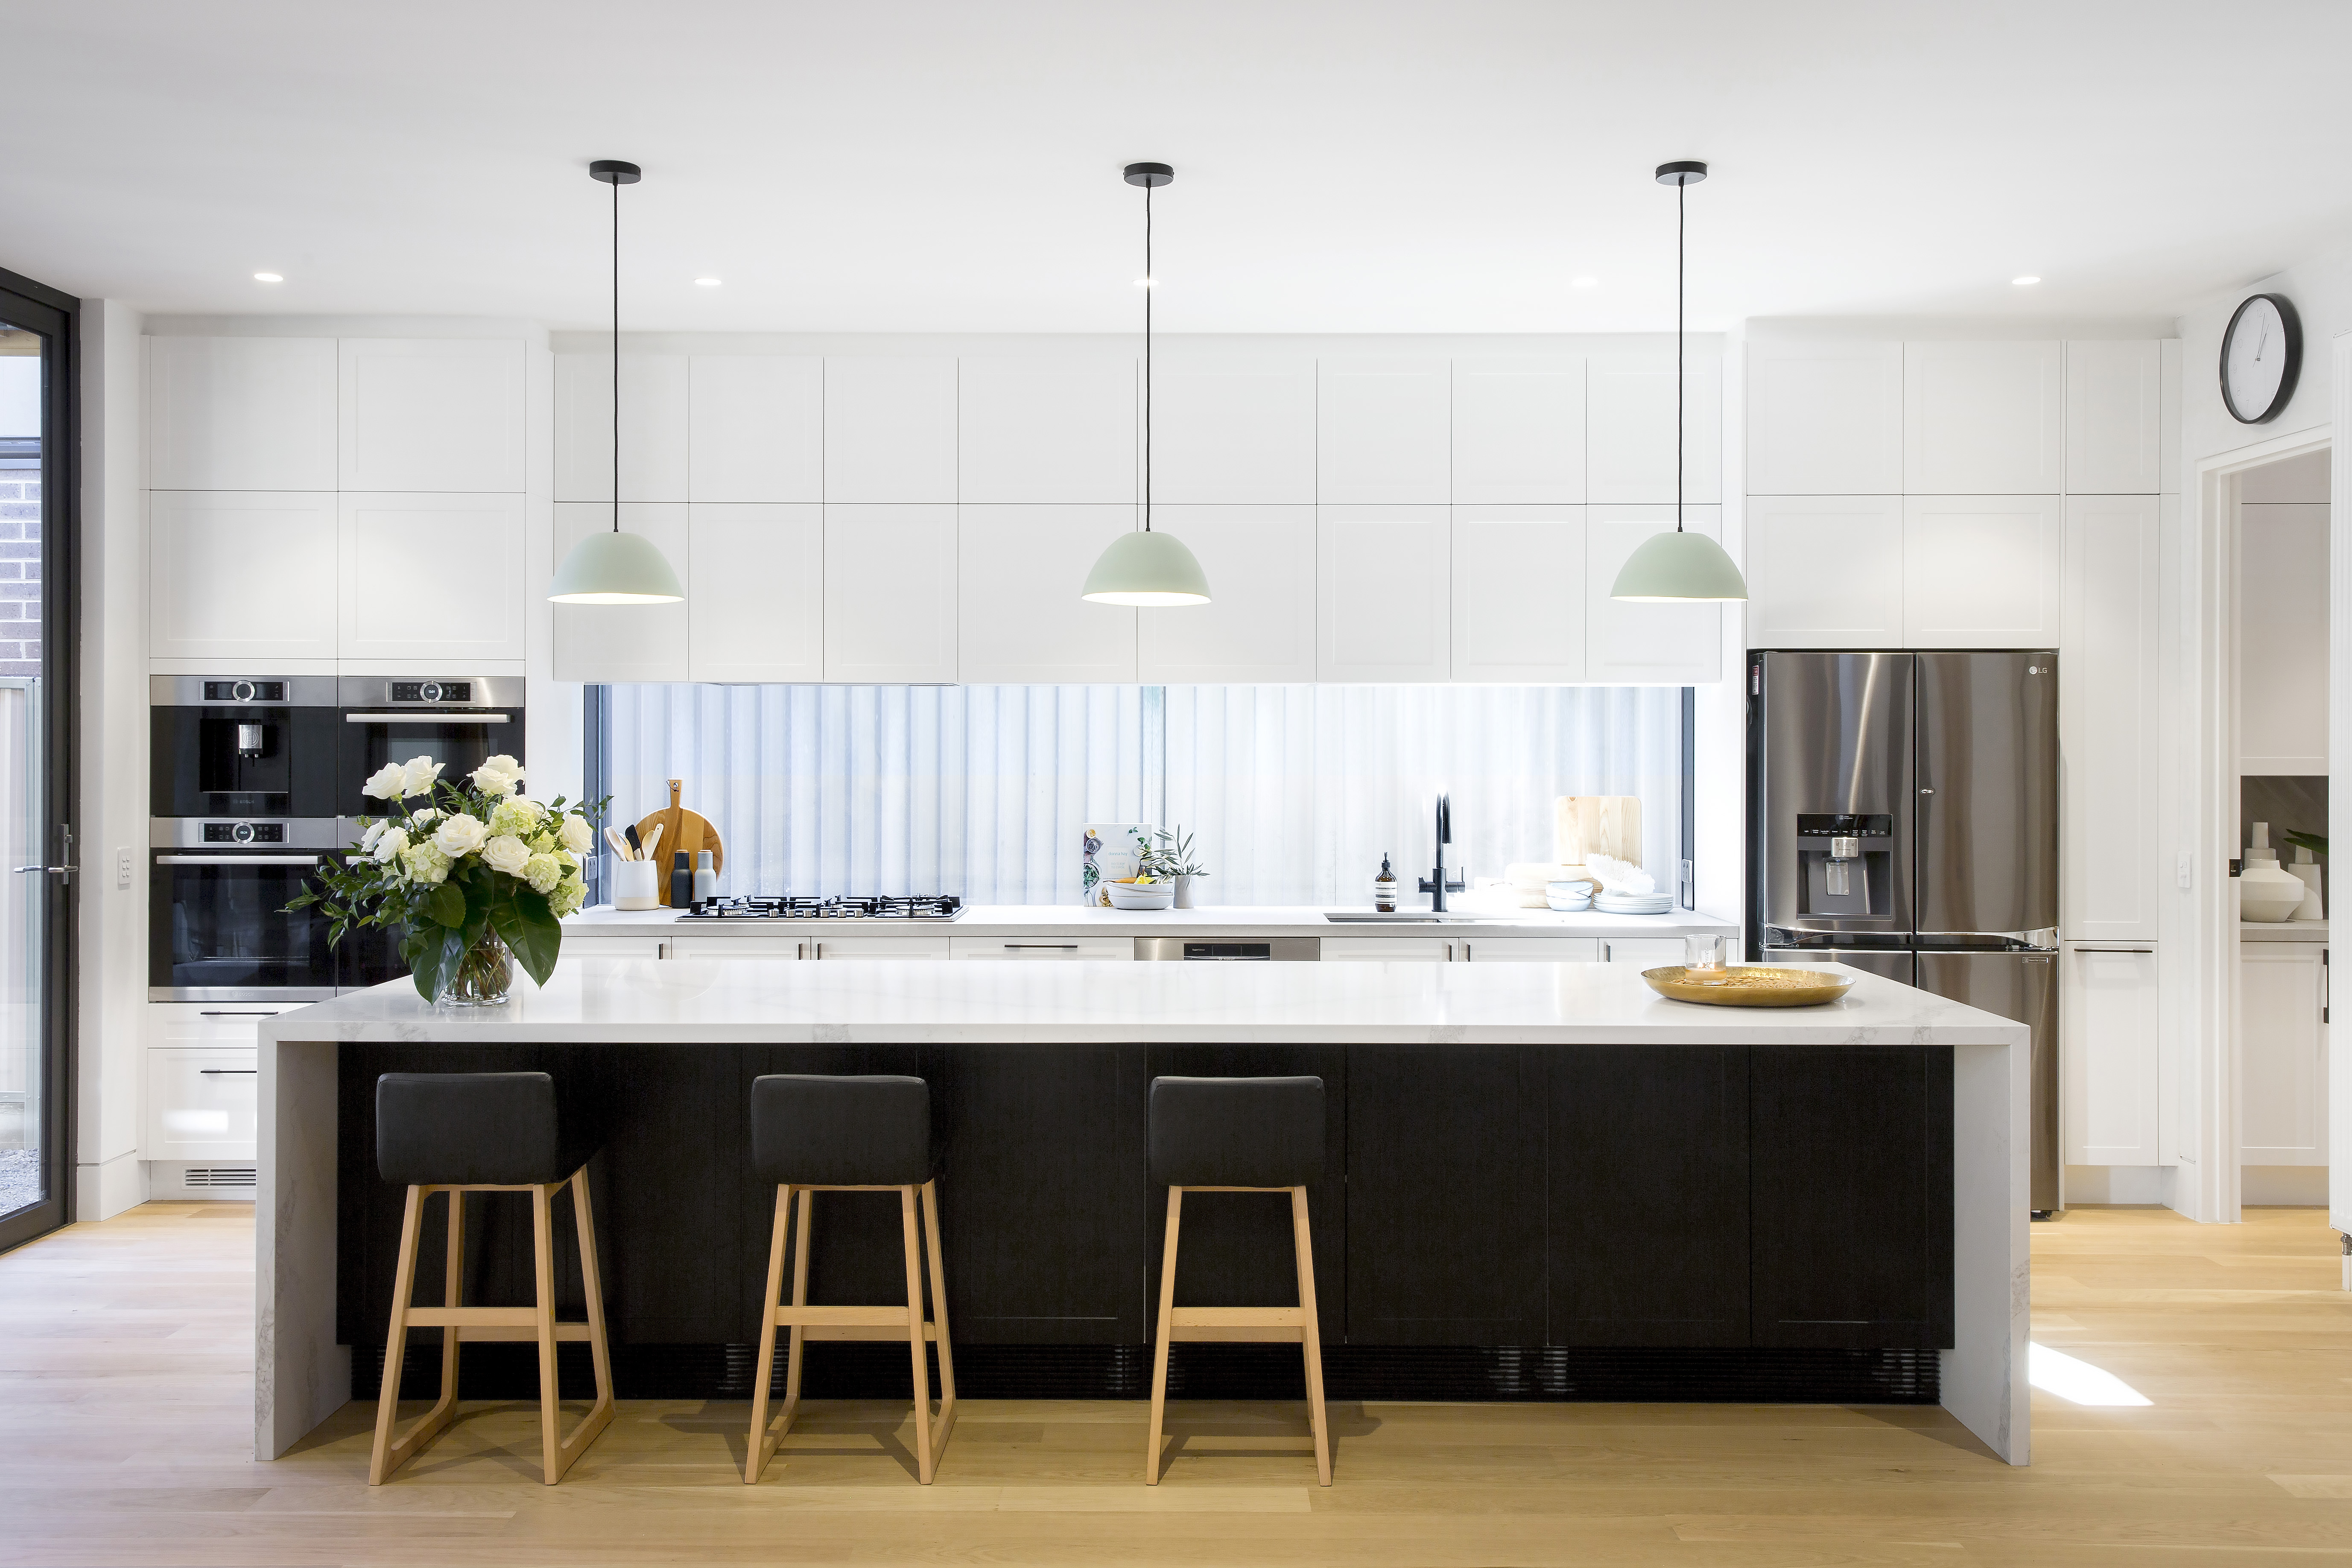 Kitchen with modern white cabinets and black island bench cabinets